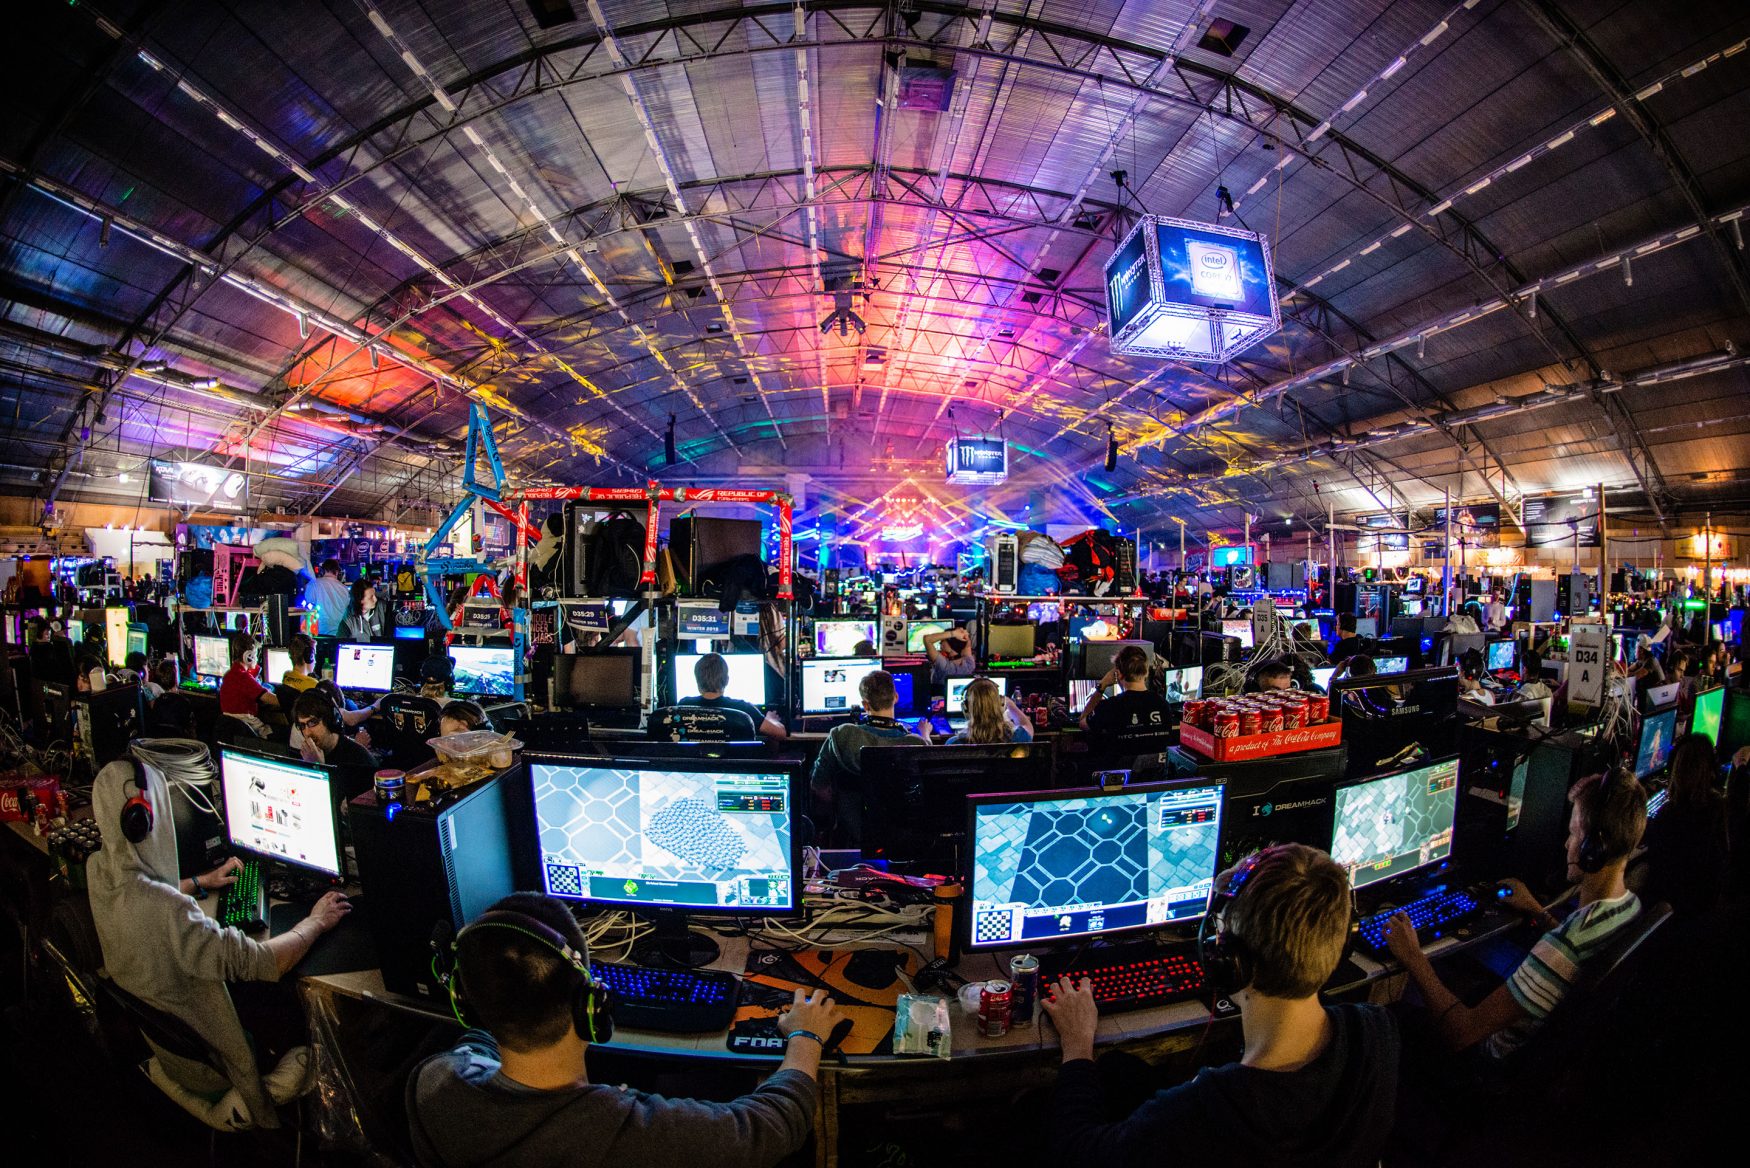 DreamHackATL World's largest video game festival comes to Atlanta